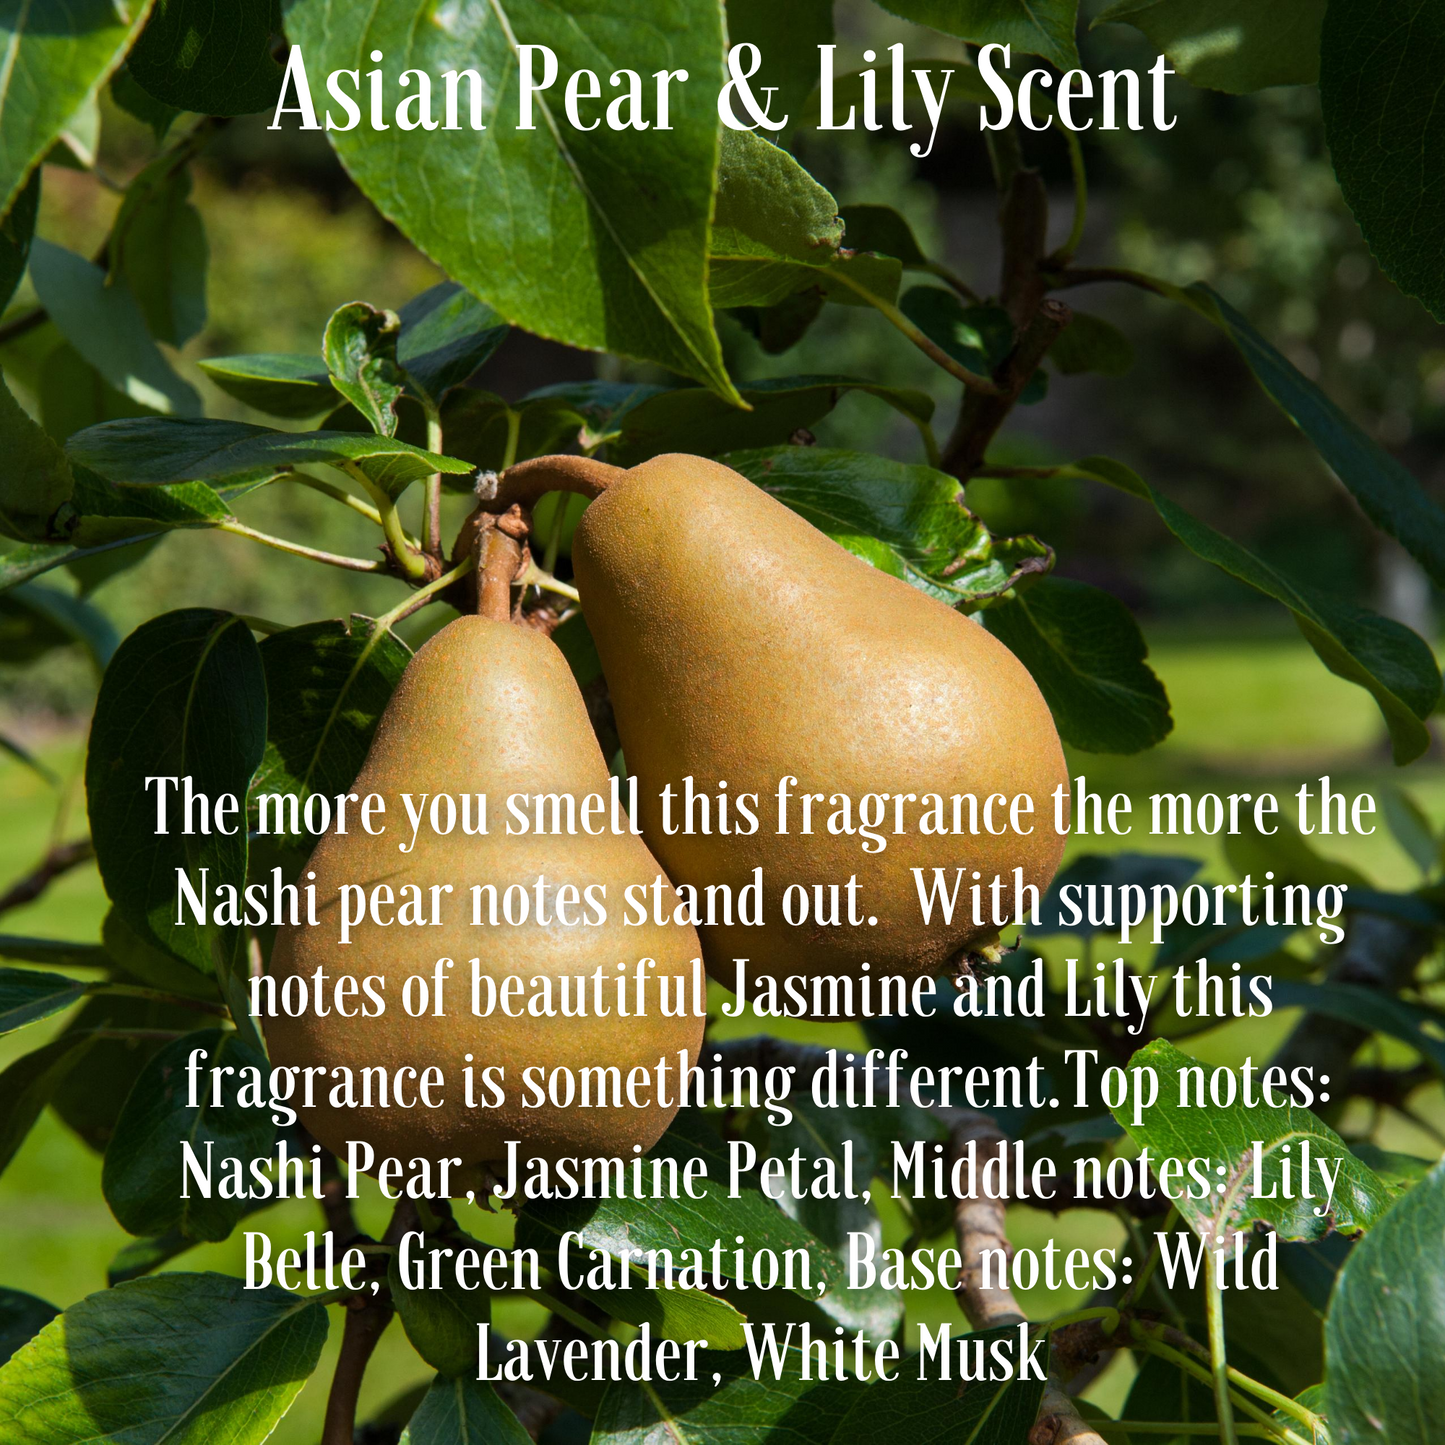 Asian Pear and Lily Scented Palm Wax Medium Jar Candle 285g/10oz